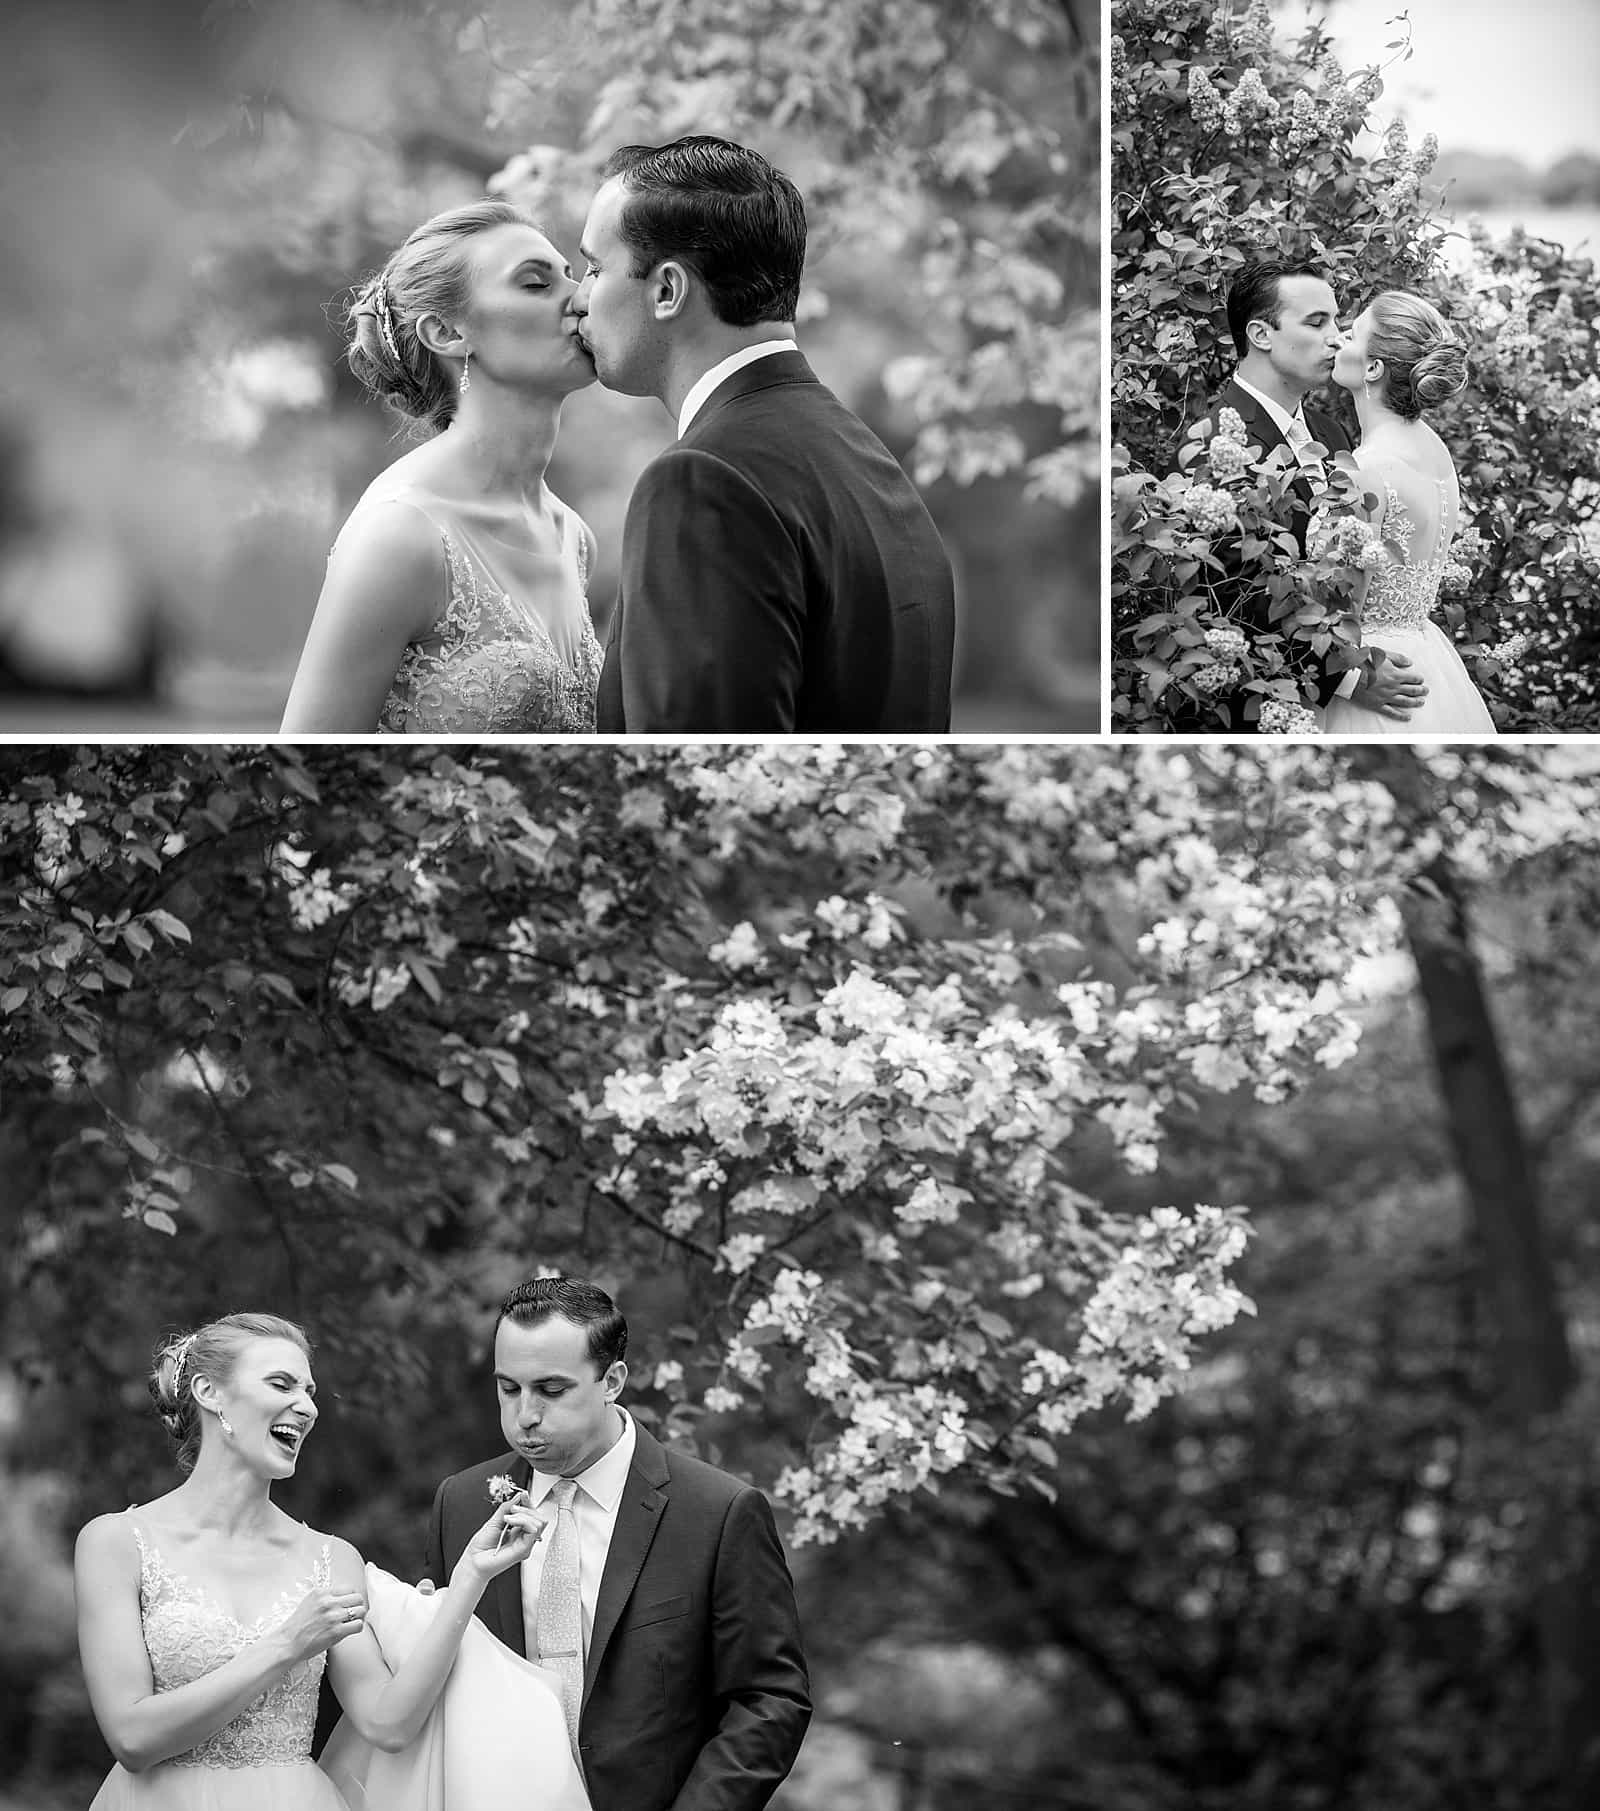 Black and white wedding portraits, bride and groom kissing in the flowers, groom blowing away petals, Glen Foerd Mansion wedding